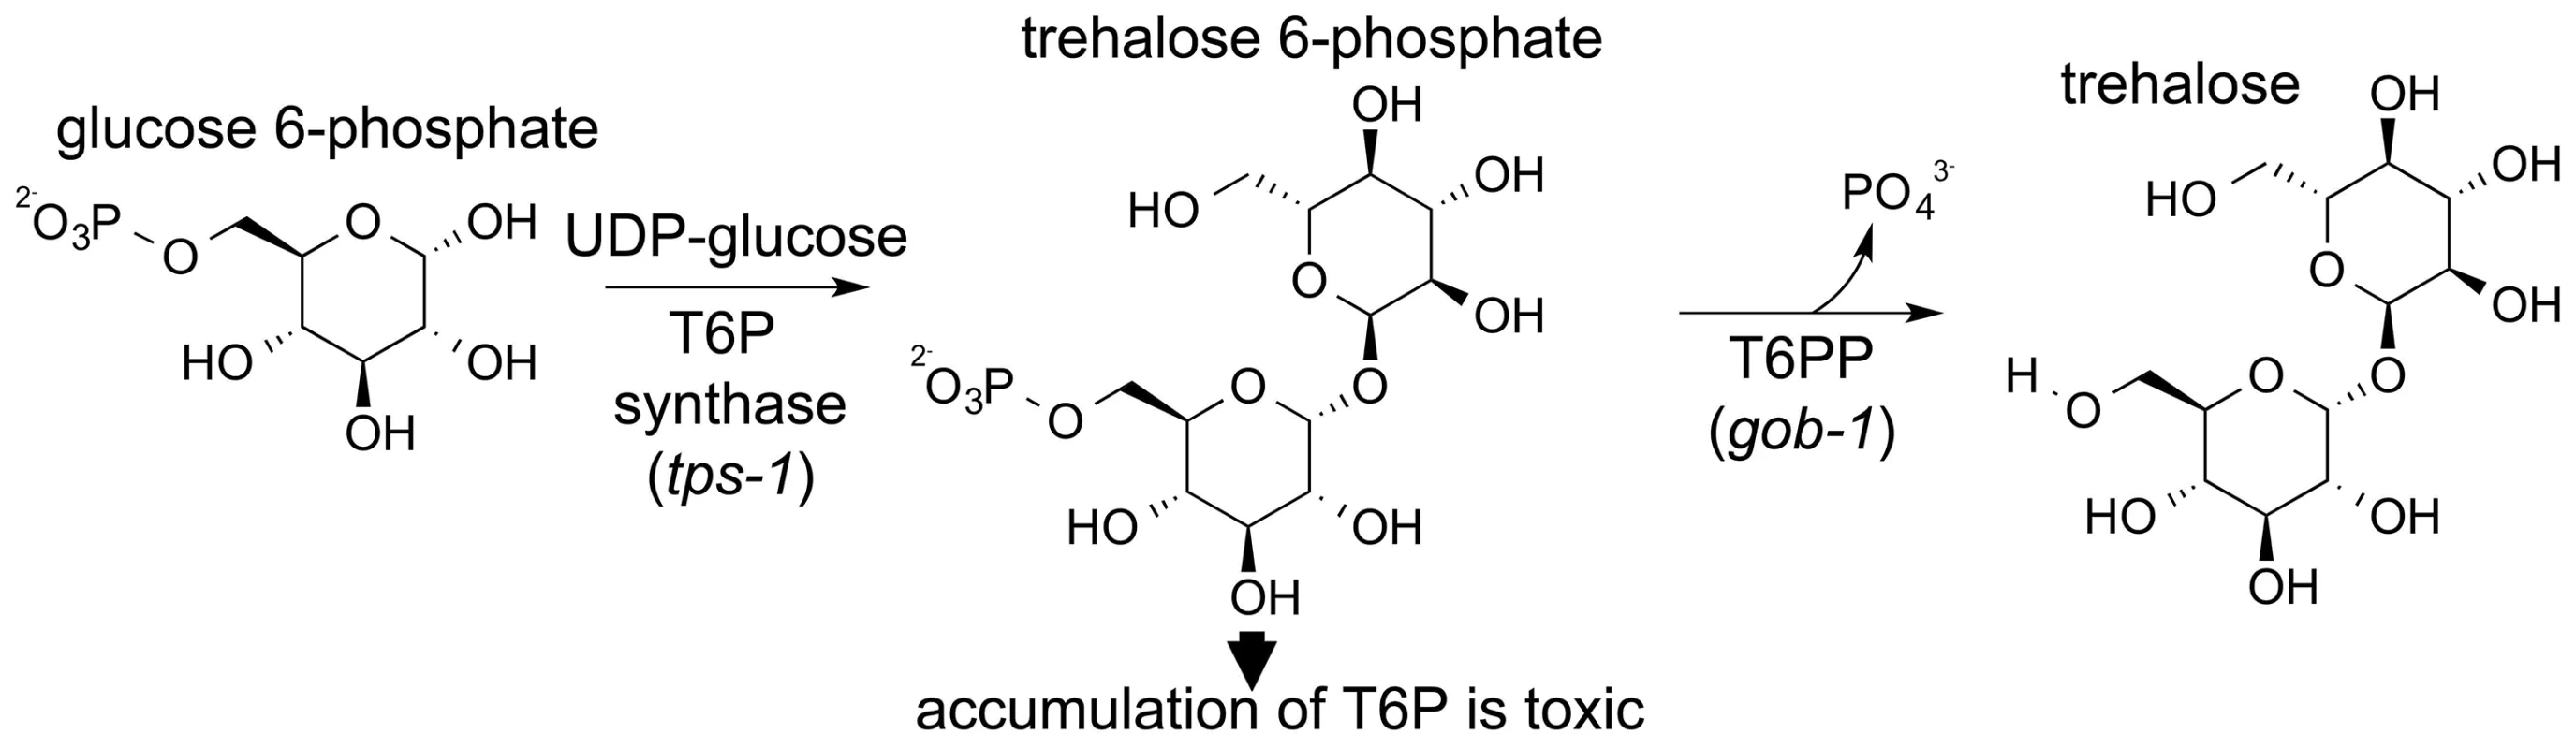 Schematic showing the two-step synthesis of trehalose.